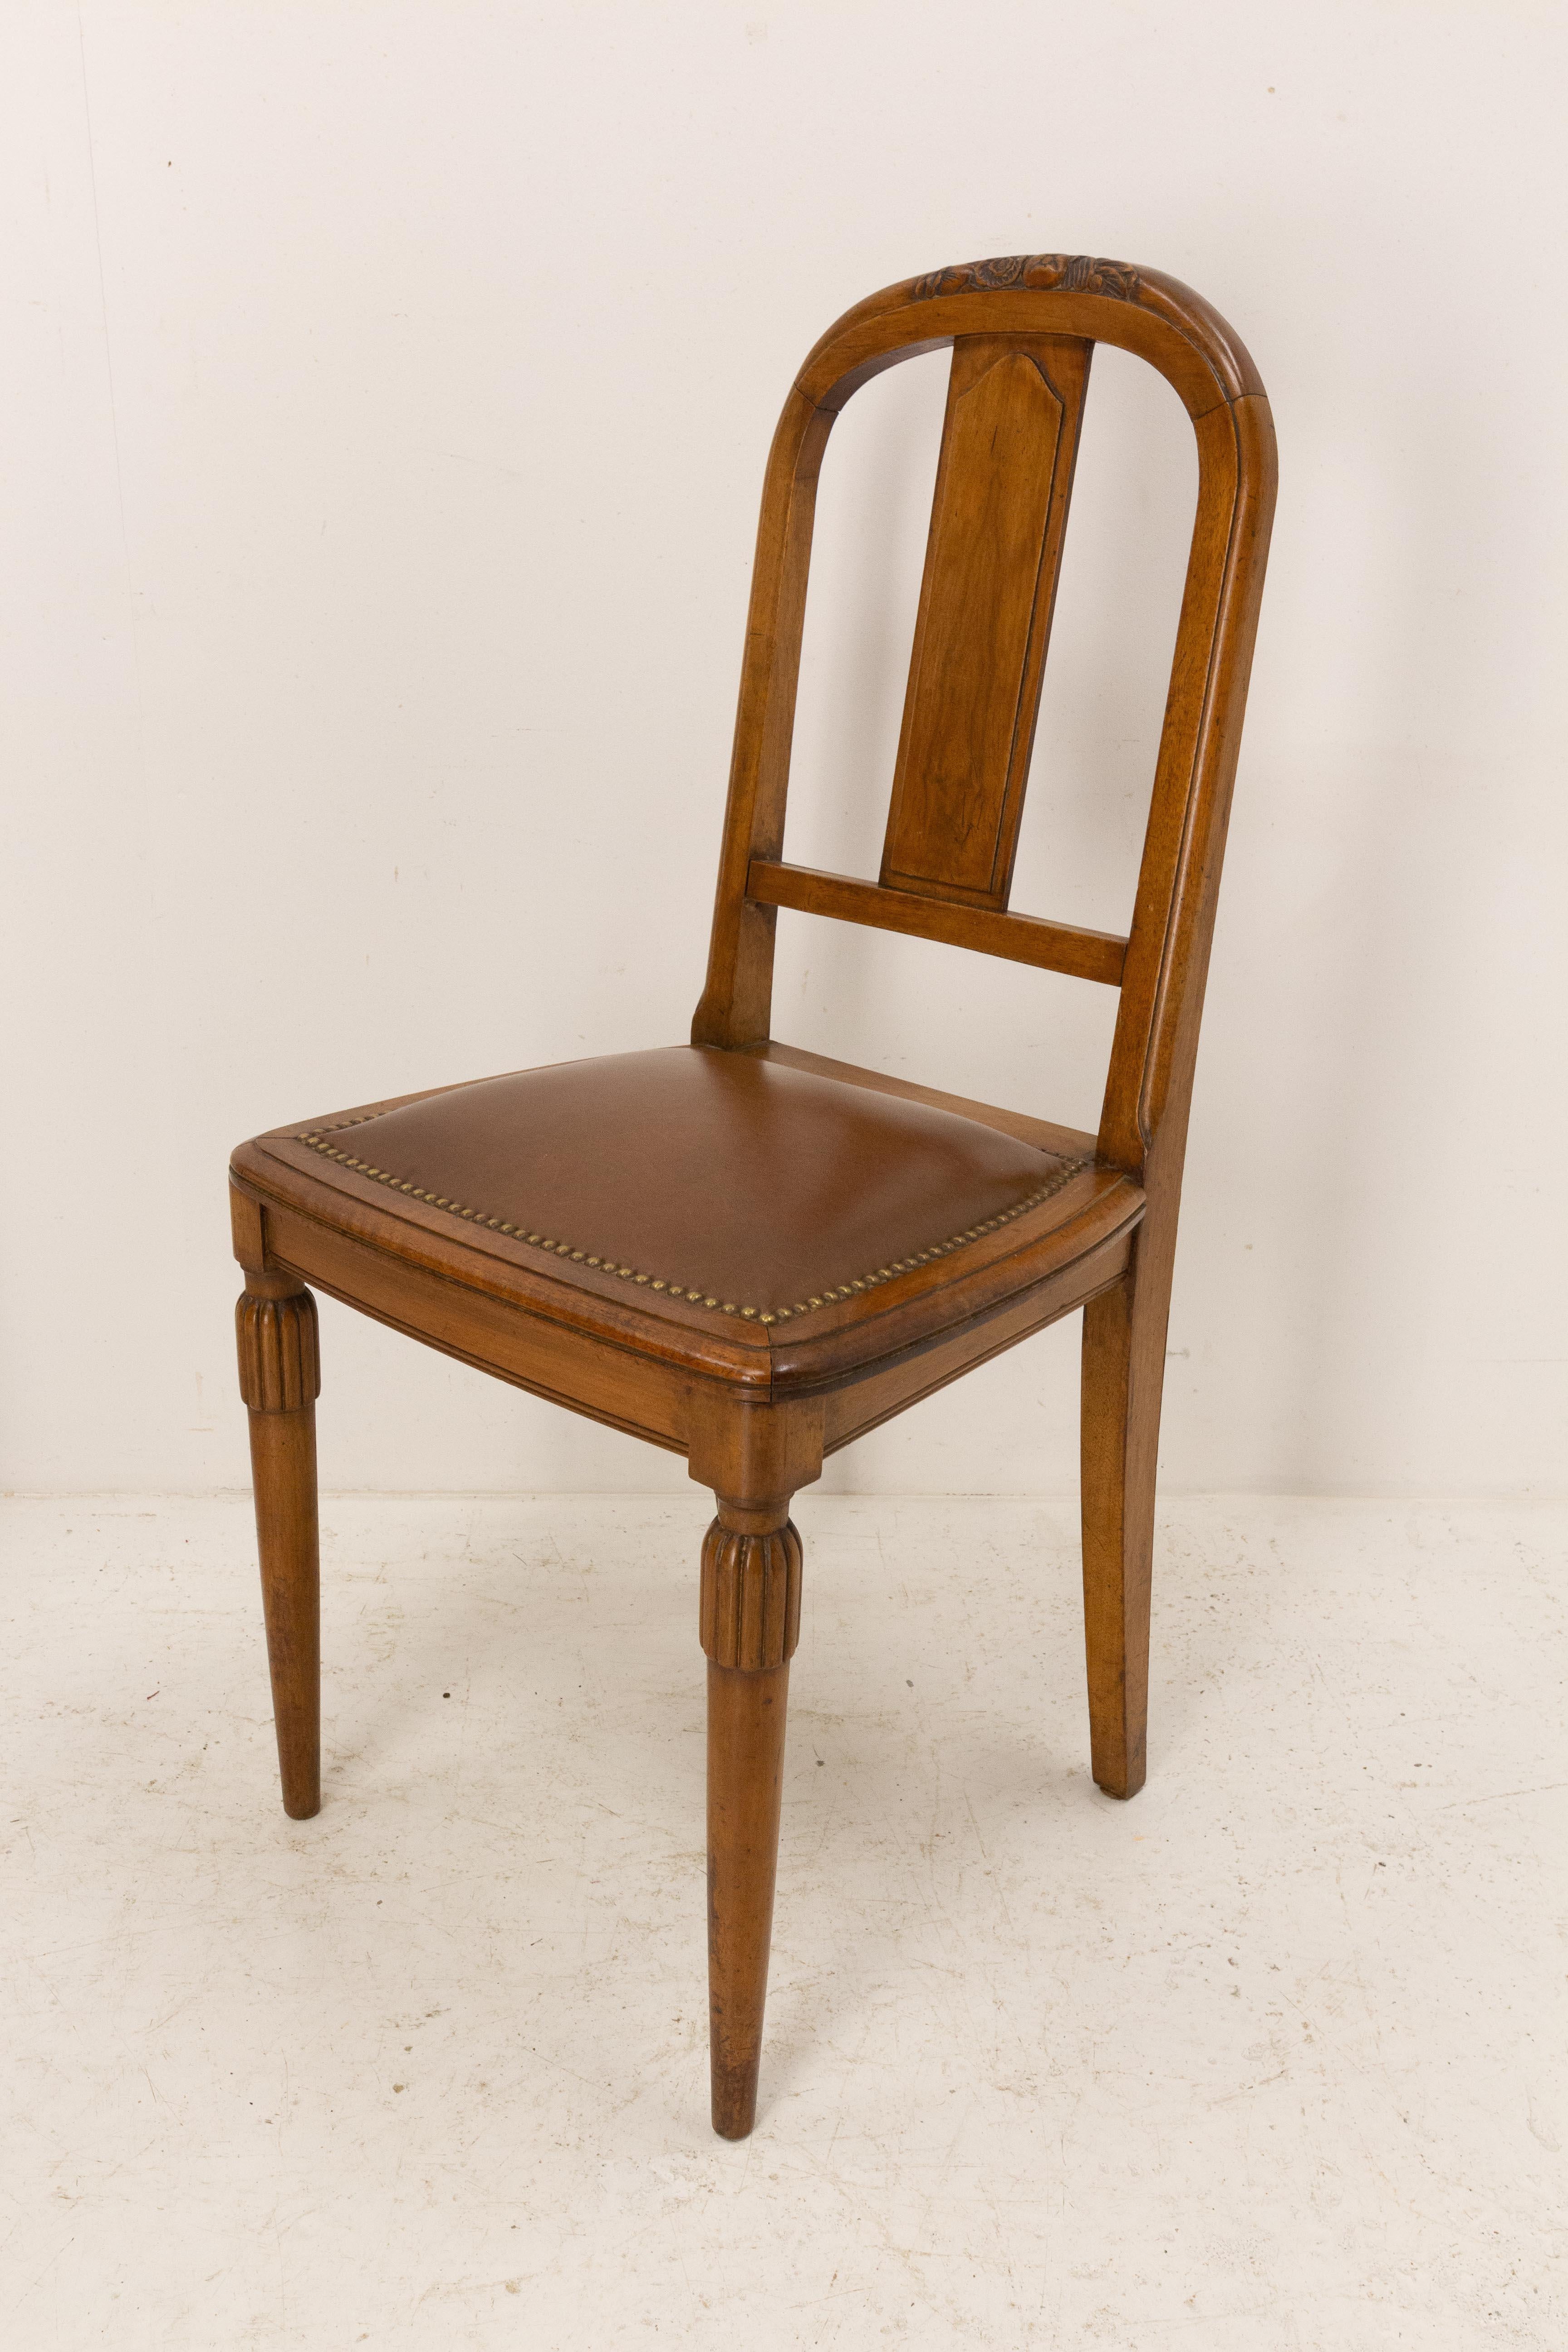 Six Art Deco Dining Walnut and Skai Chairs, French, circa 1930 For Sale 1